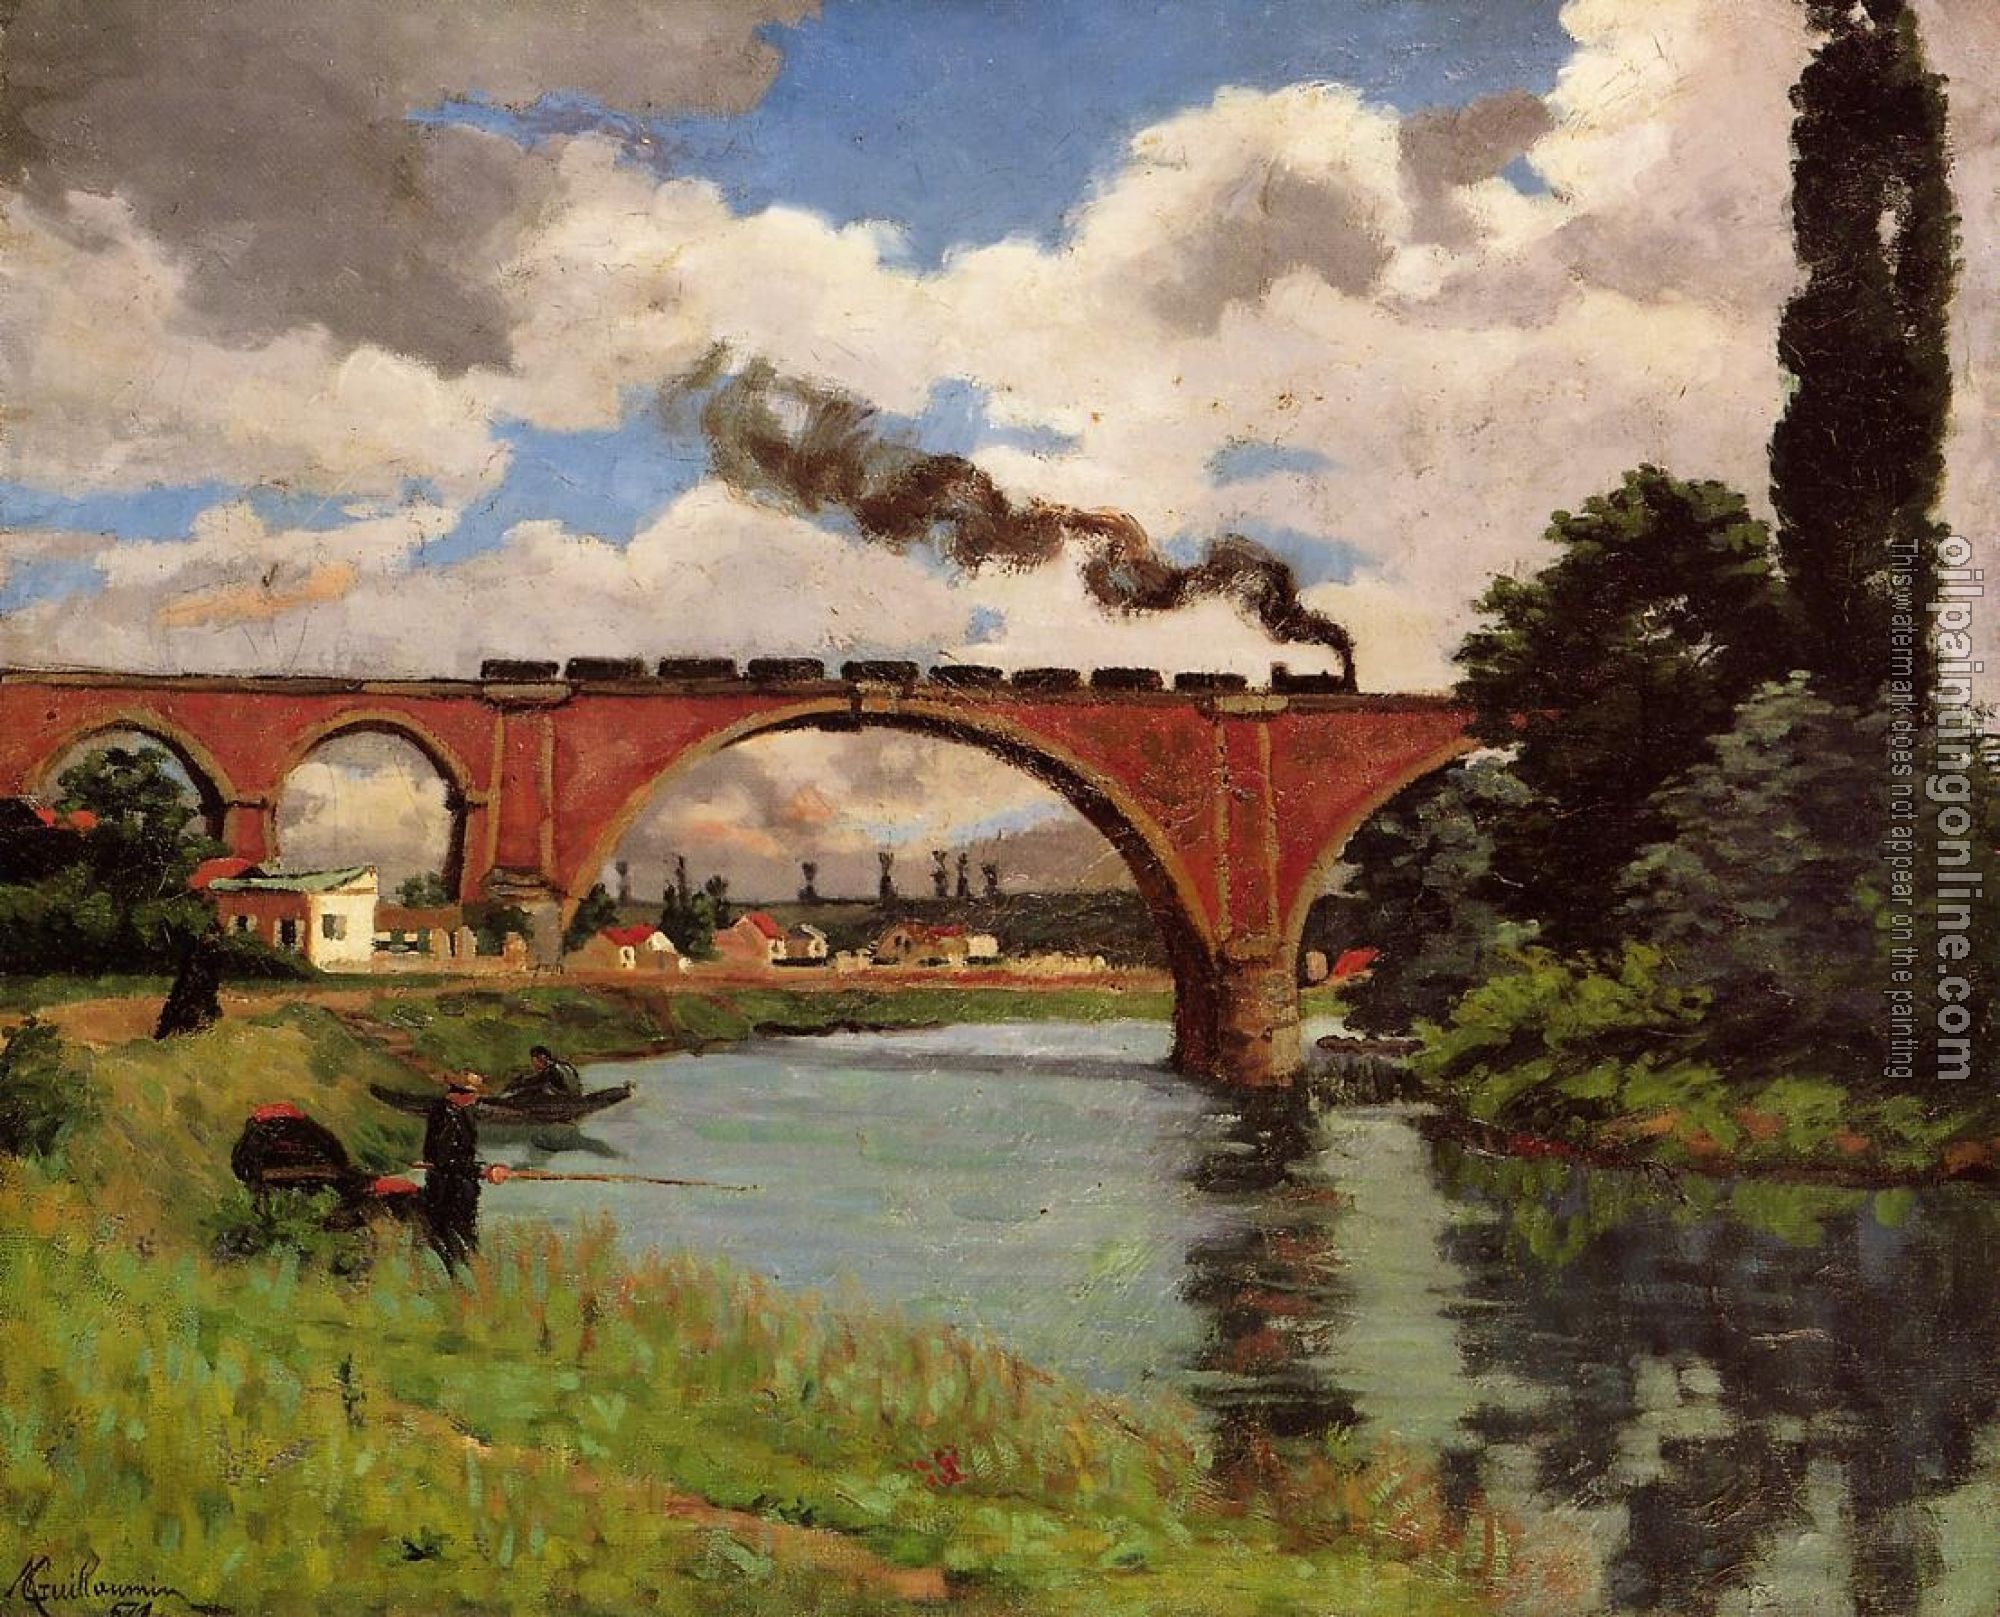 Guillaumin, Armand - Bridge over the Marne at Joinville